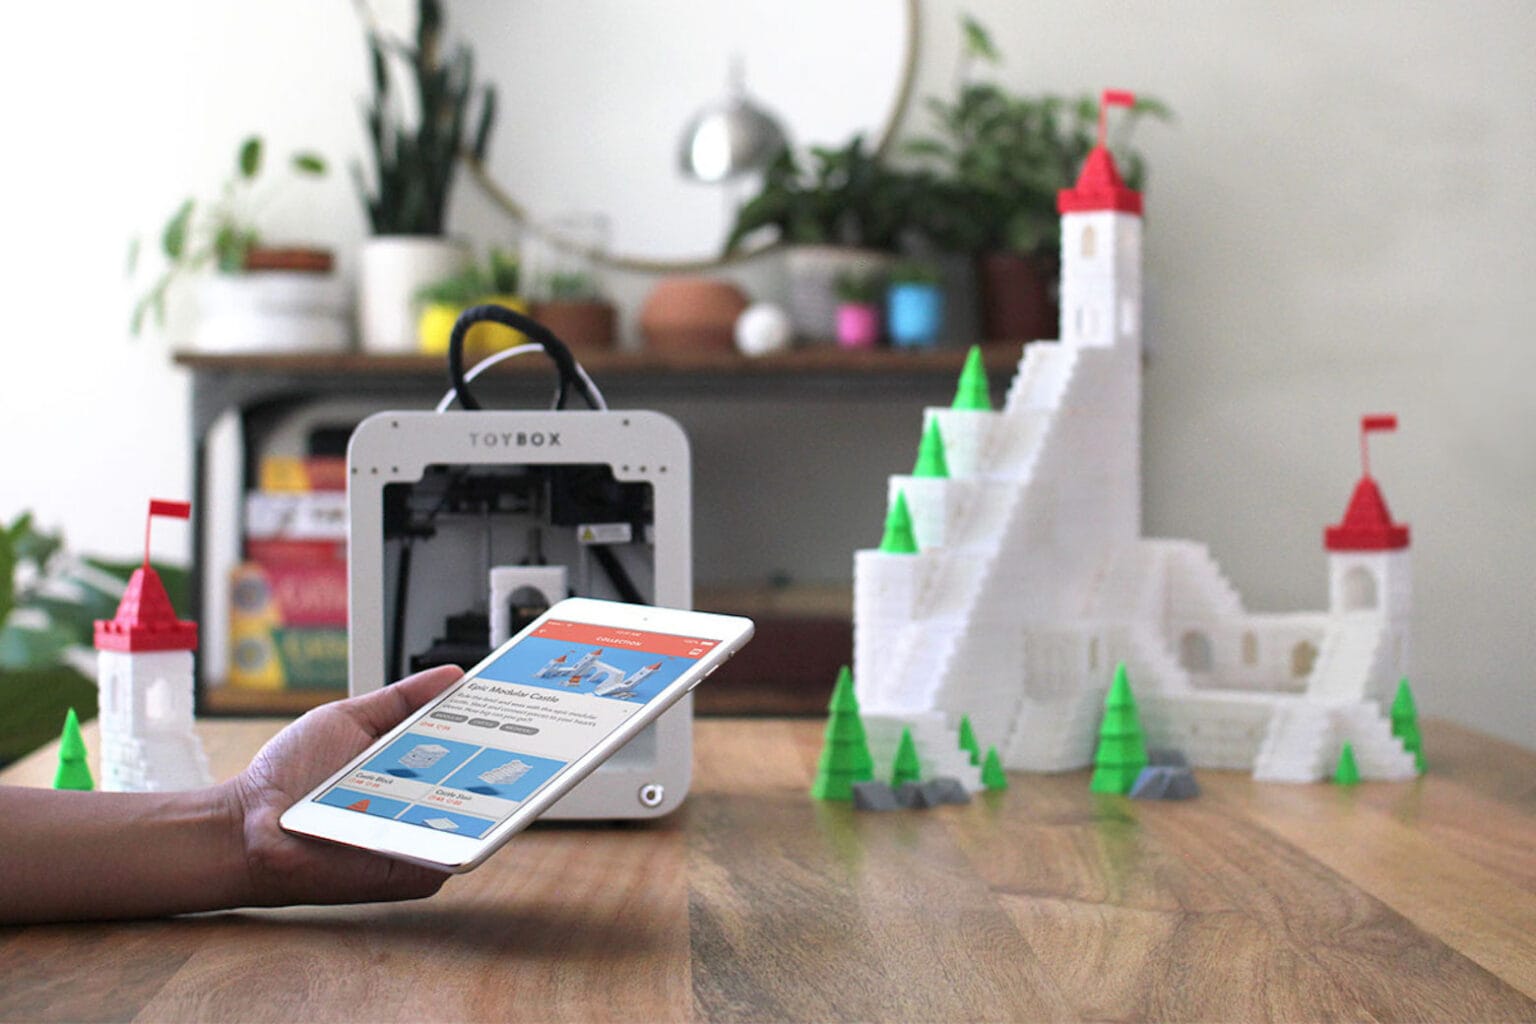 This 5-star rated 3D printer lets kids create their own toys.